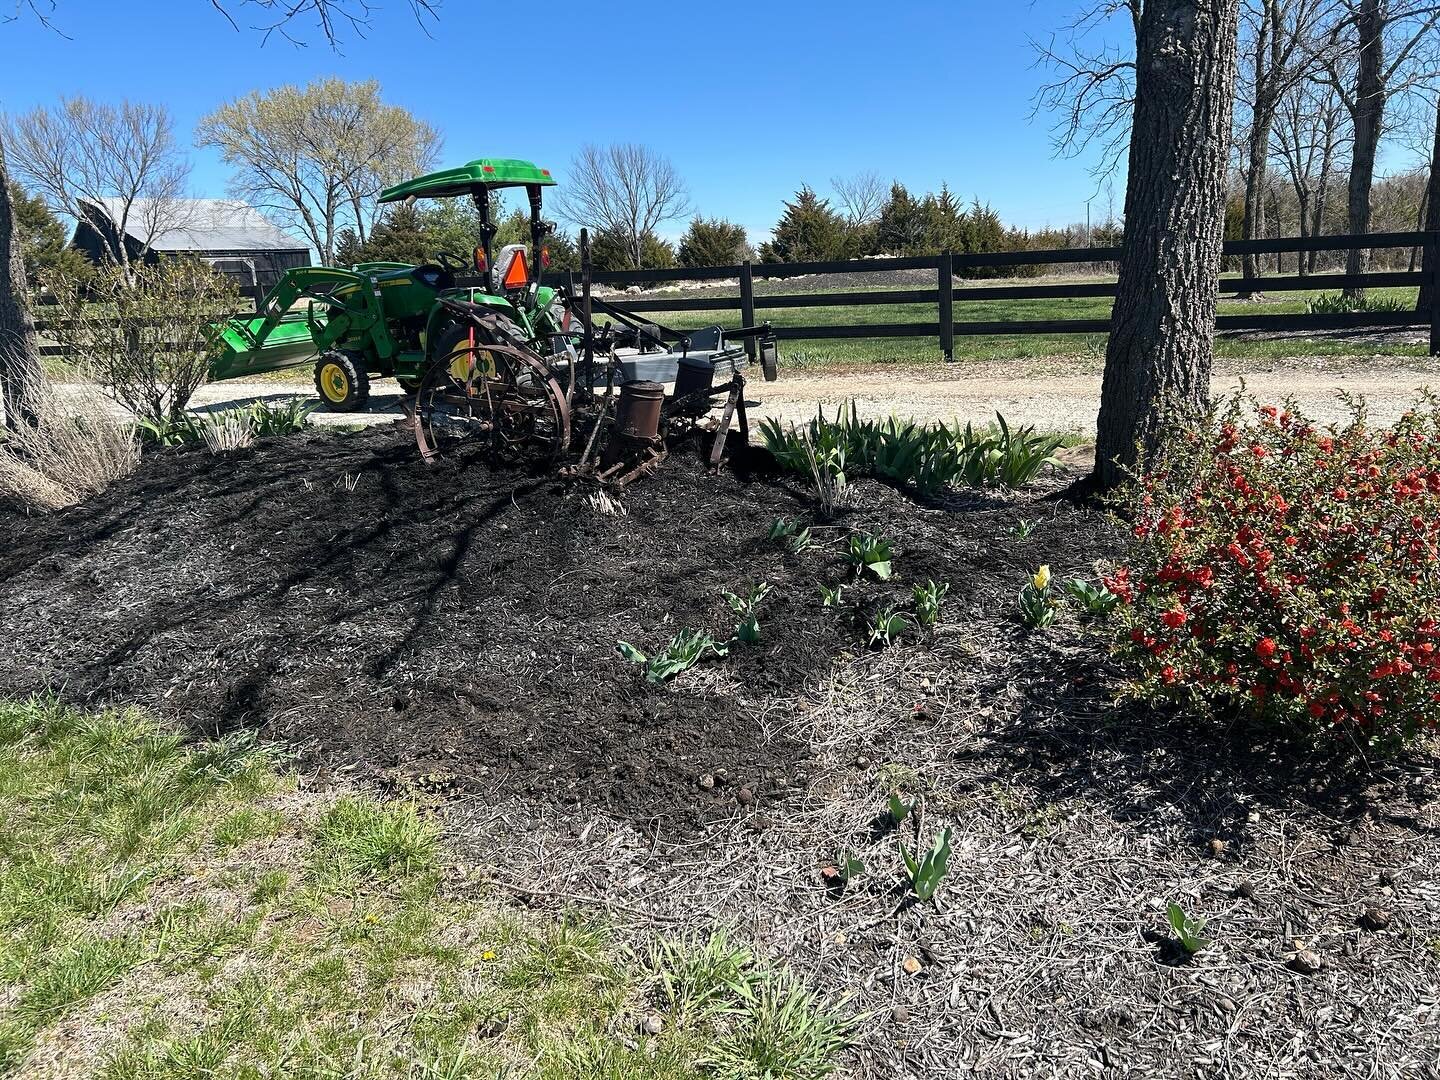 Spring cleanup and mulch going down at the black barn. Always working to make our space as beautiful as possible 🌷🌿☀️